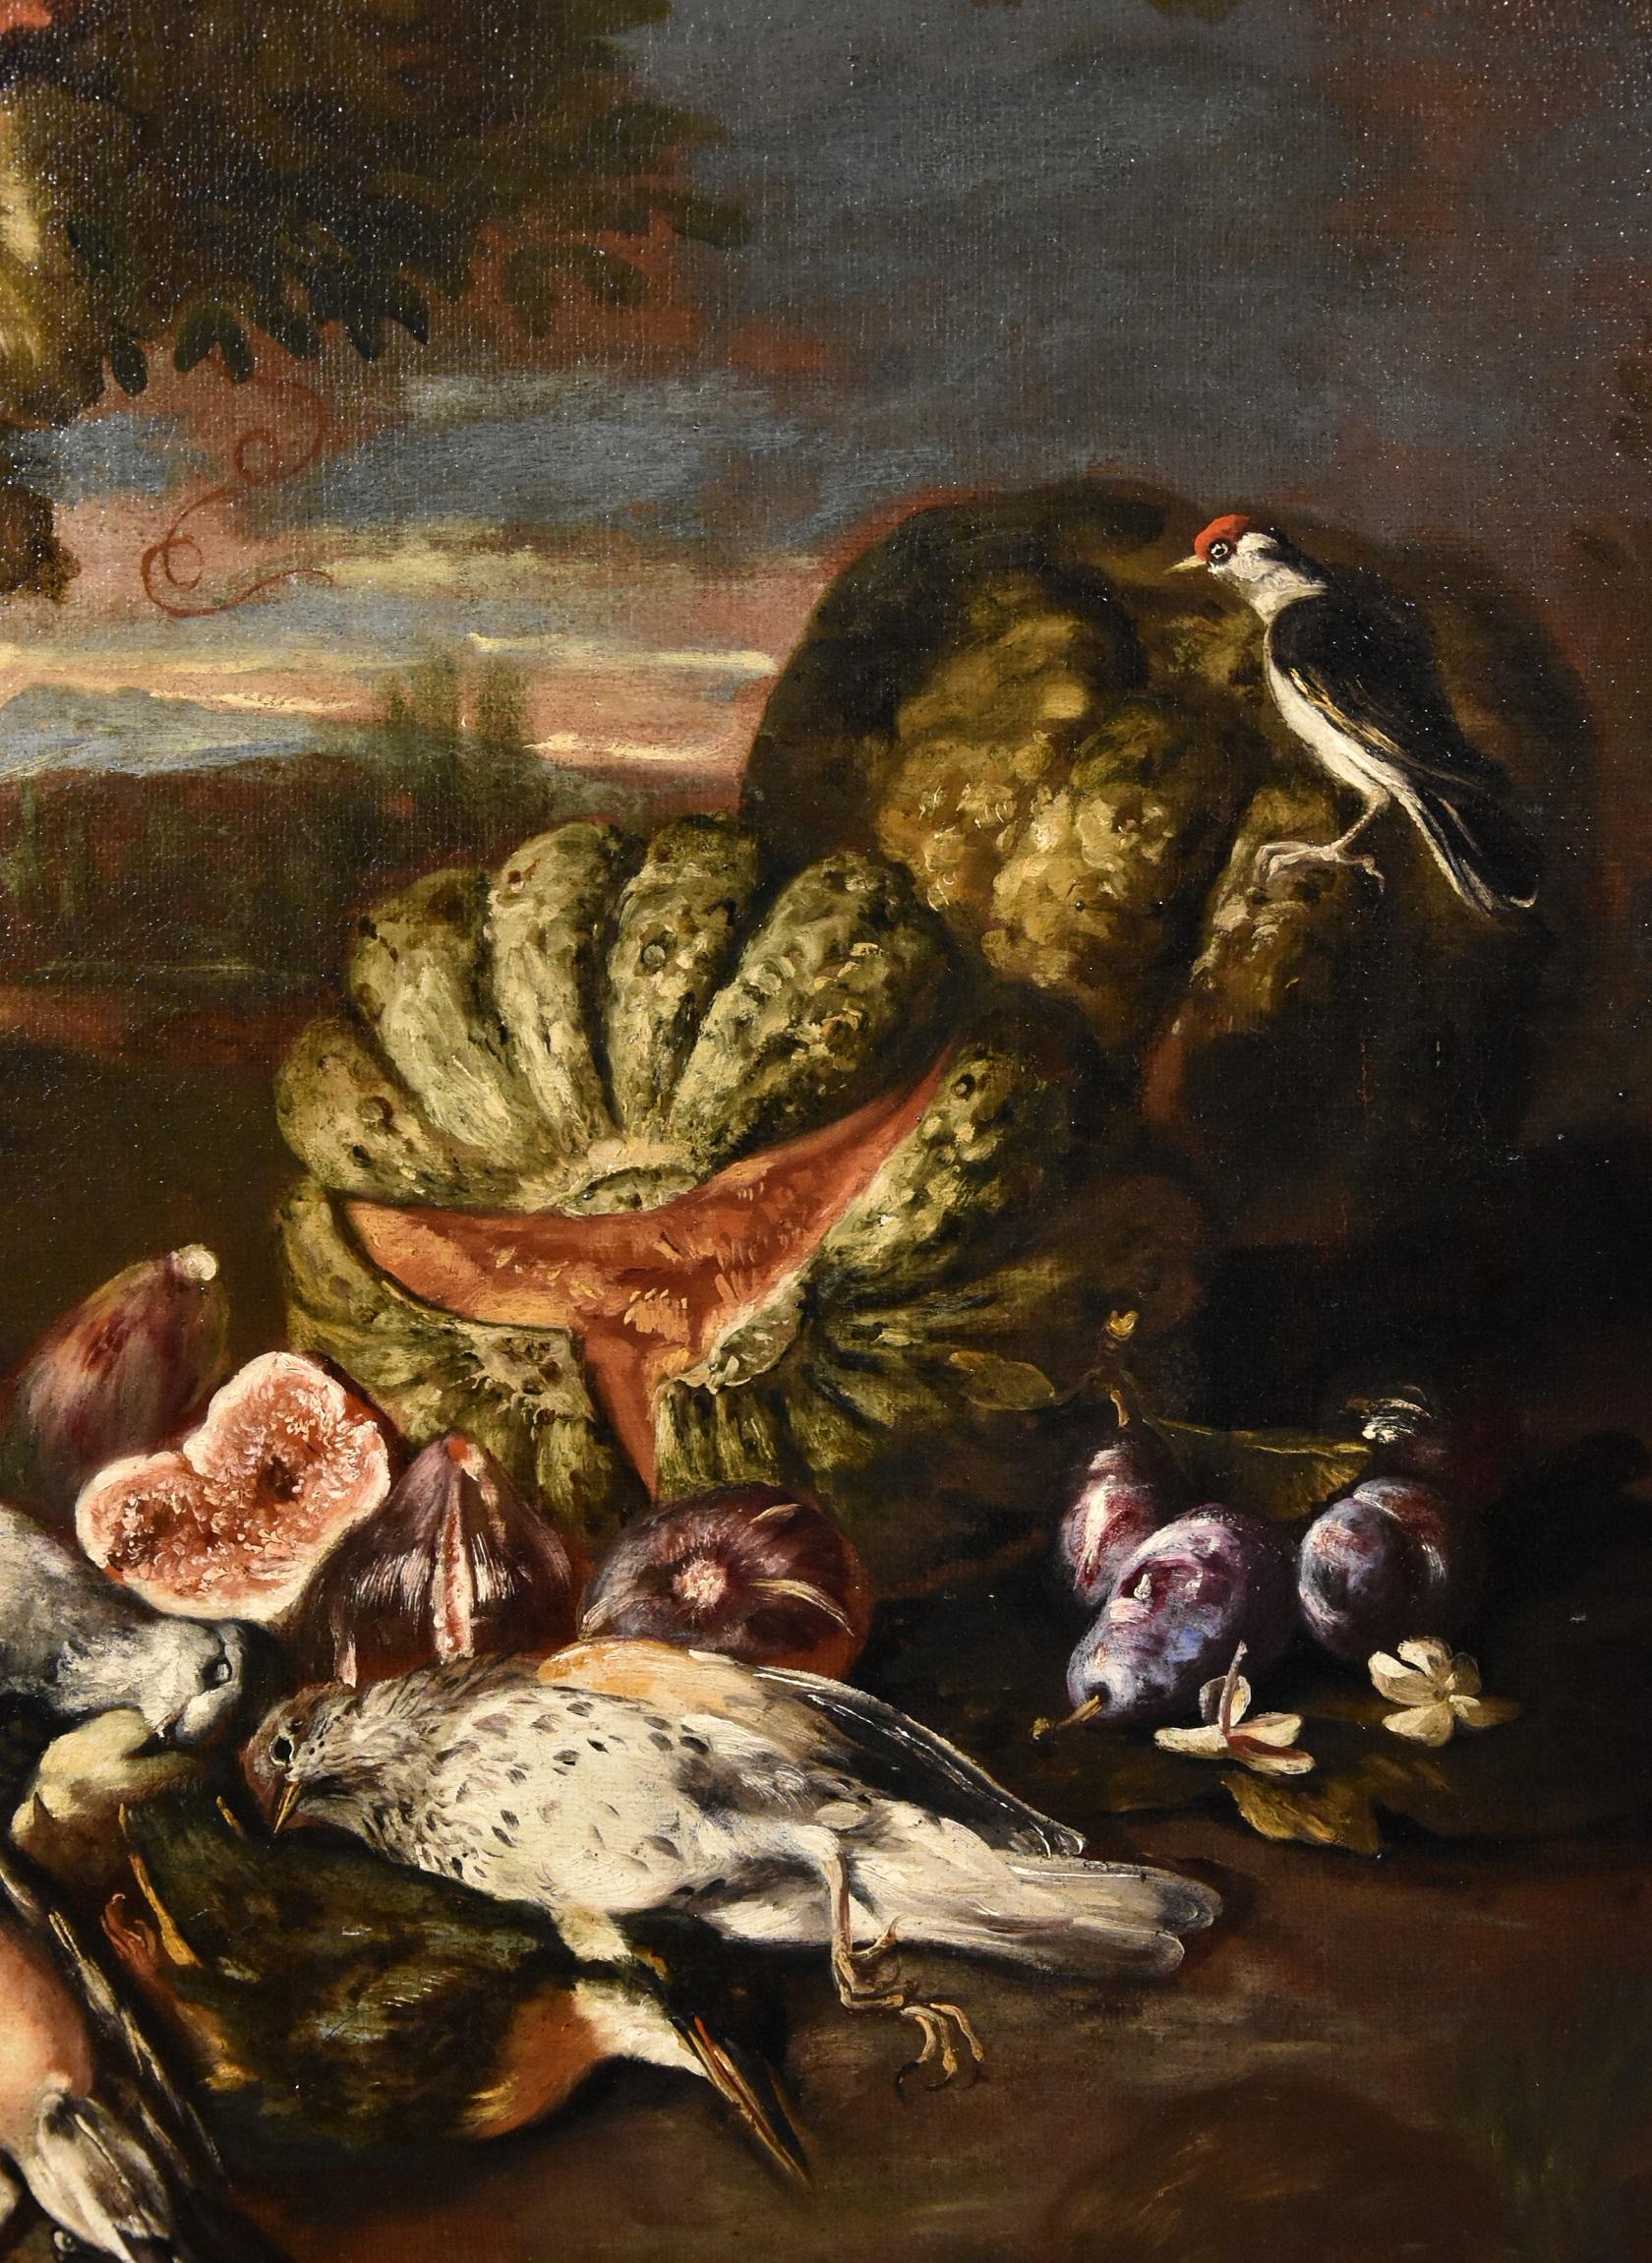 Still-Life Flower Landscape Castelli Paint Oil on canvas Old master Italian art - Brown Still-Life Painting by  Giovanni Paolo Castelli, known as Spadino (Rome, 1659 - 1730)